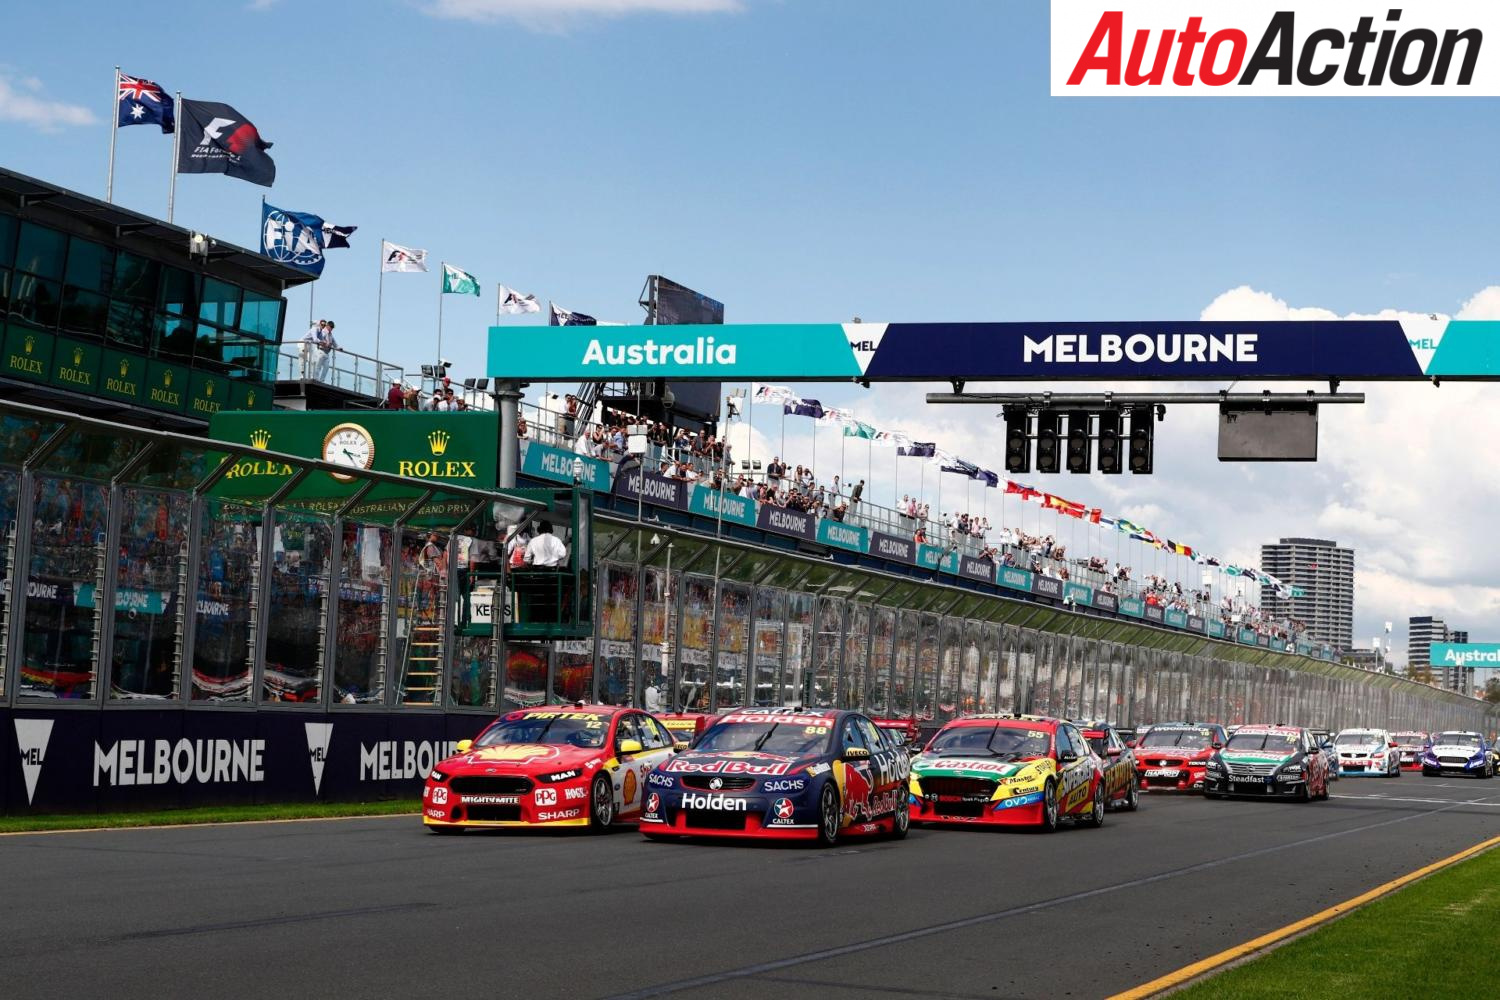 Supercars will race for Championship points at Albert Park - Photo: LAT